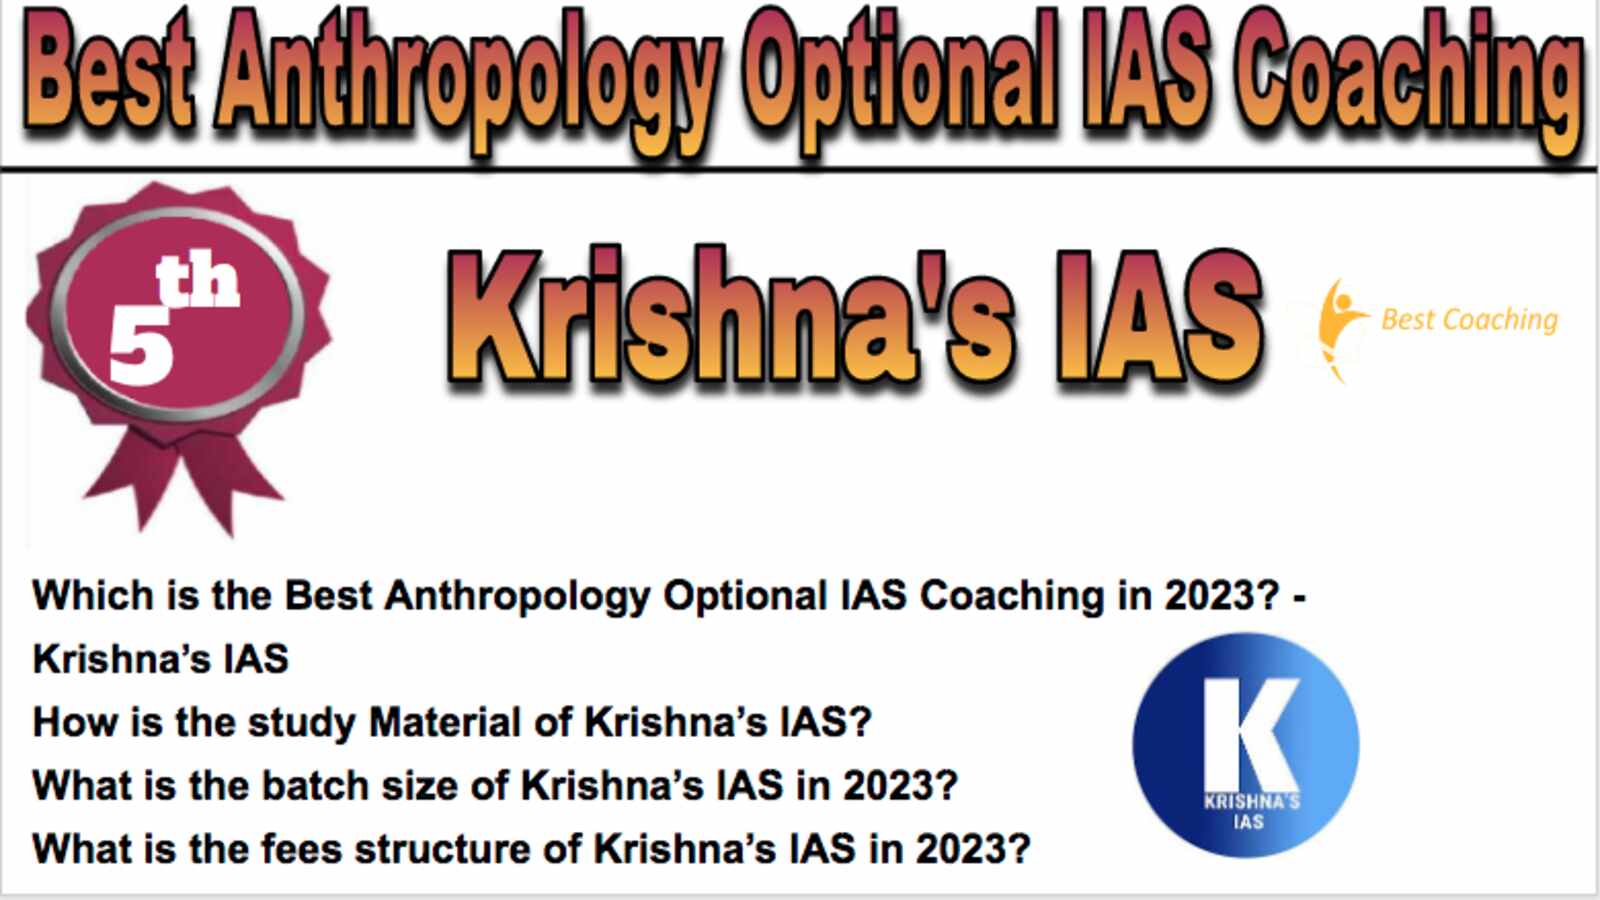 5th Best Anthropology Optional IAS Coaching 2023